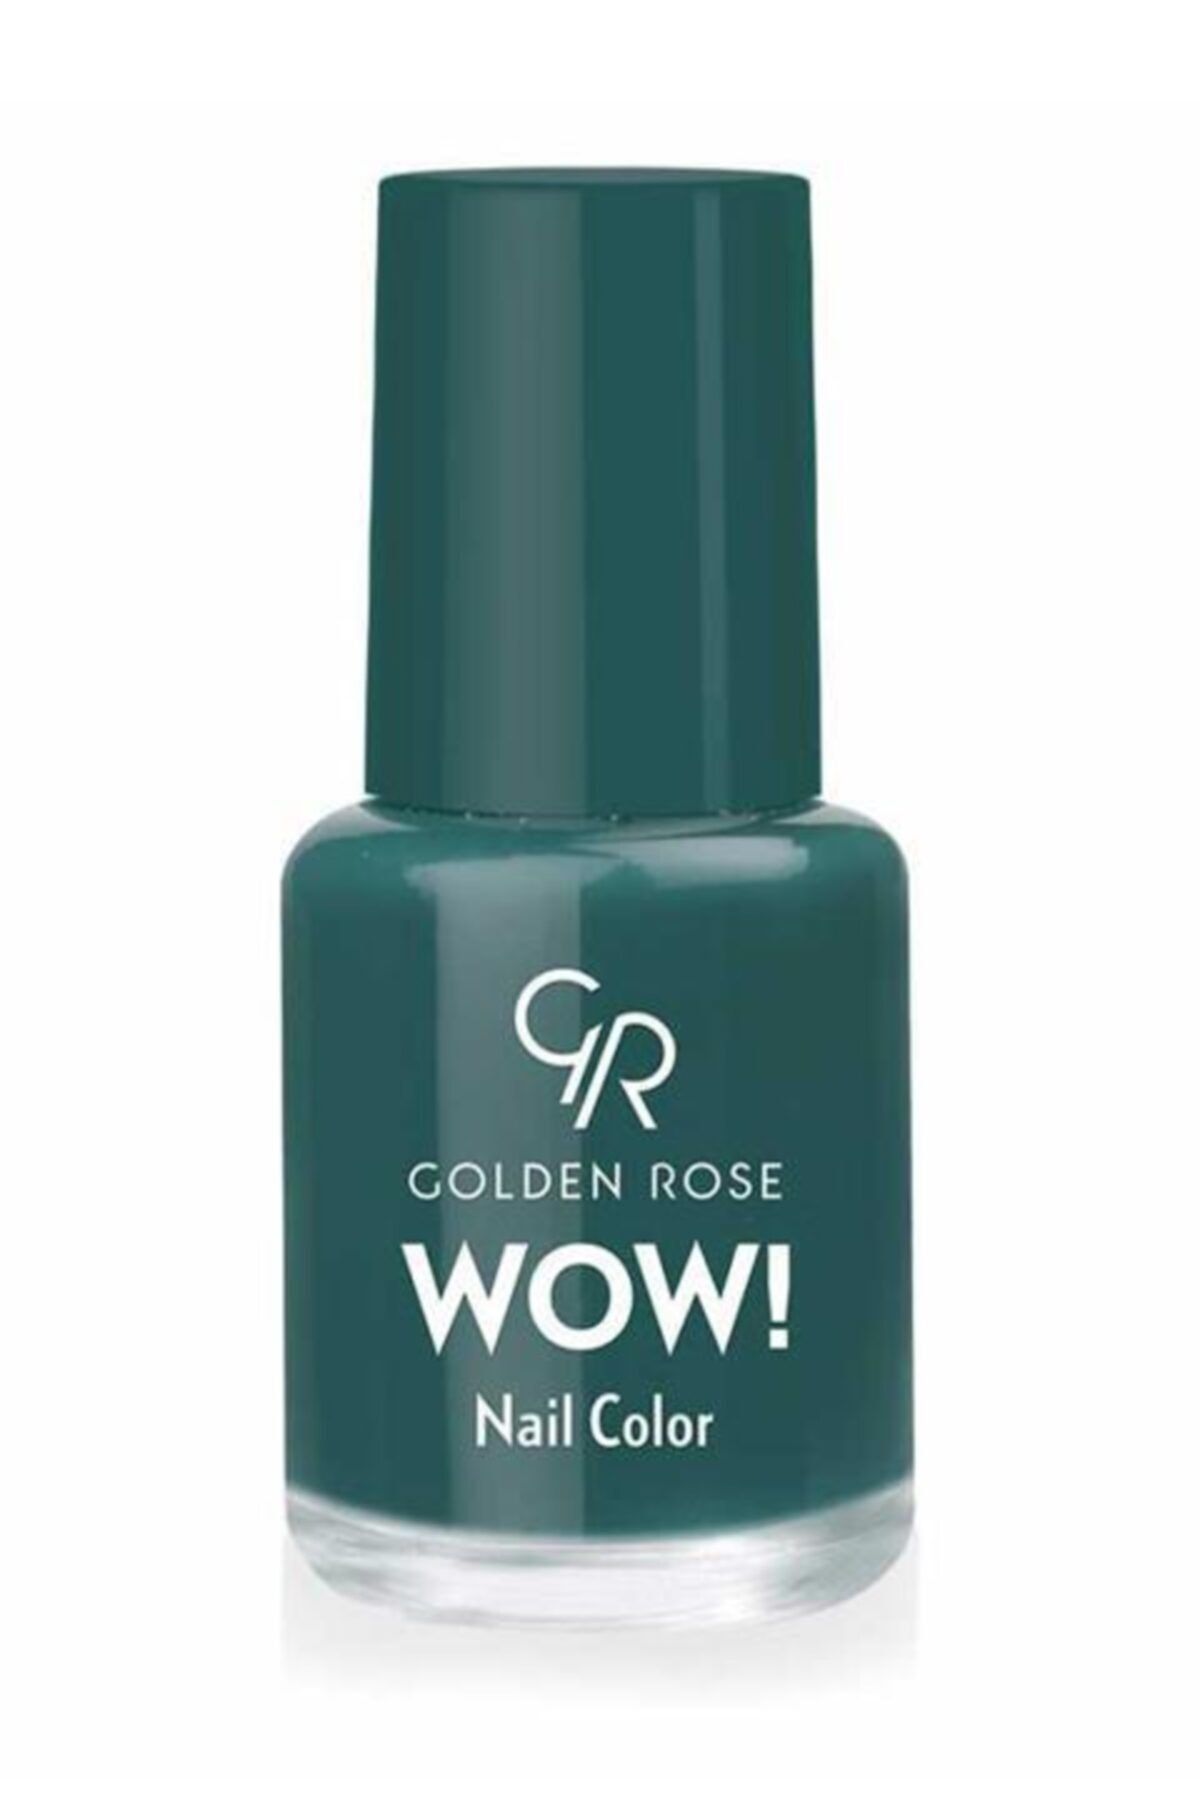 Golden Rose Wow Nail Color - No 71